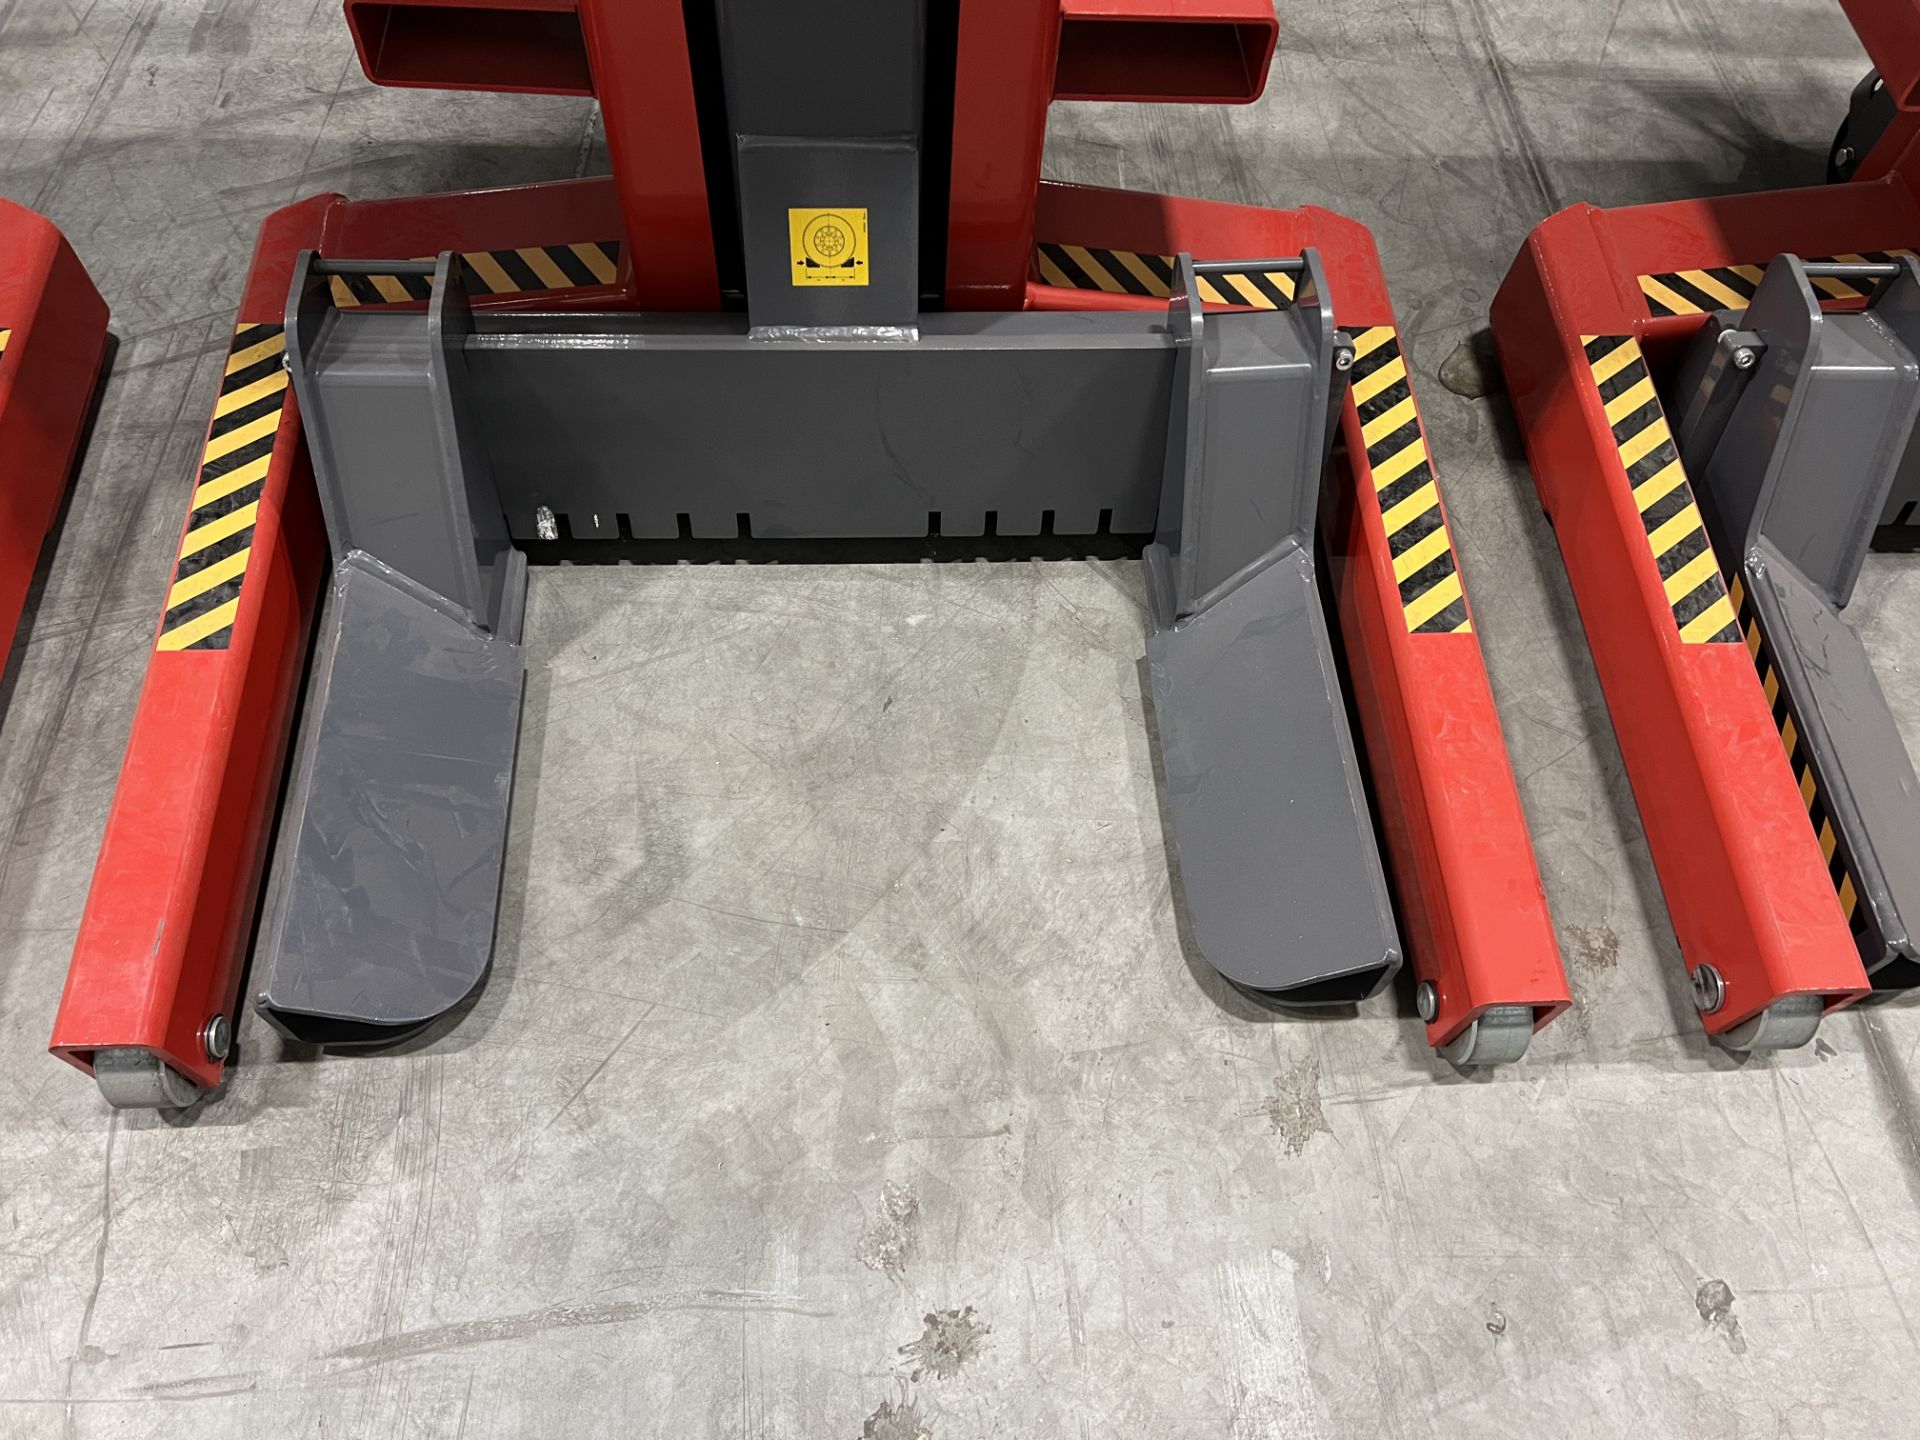 Qty 4, Totalkare T8DC cable free mobile column vehicle lifts, S/No. 012240/4, 012240/3, 012240/2, - Image 7 of 17